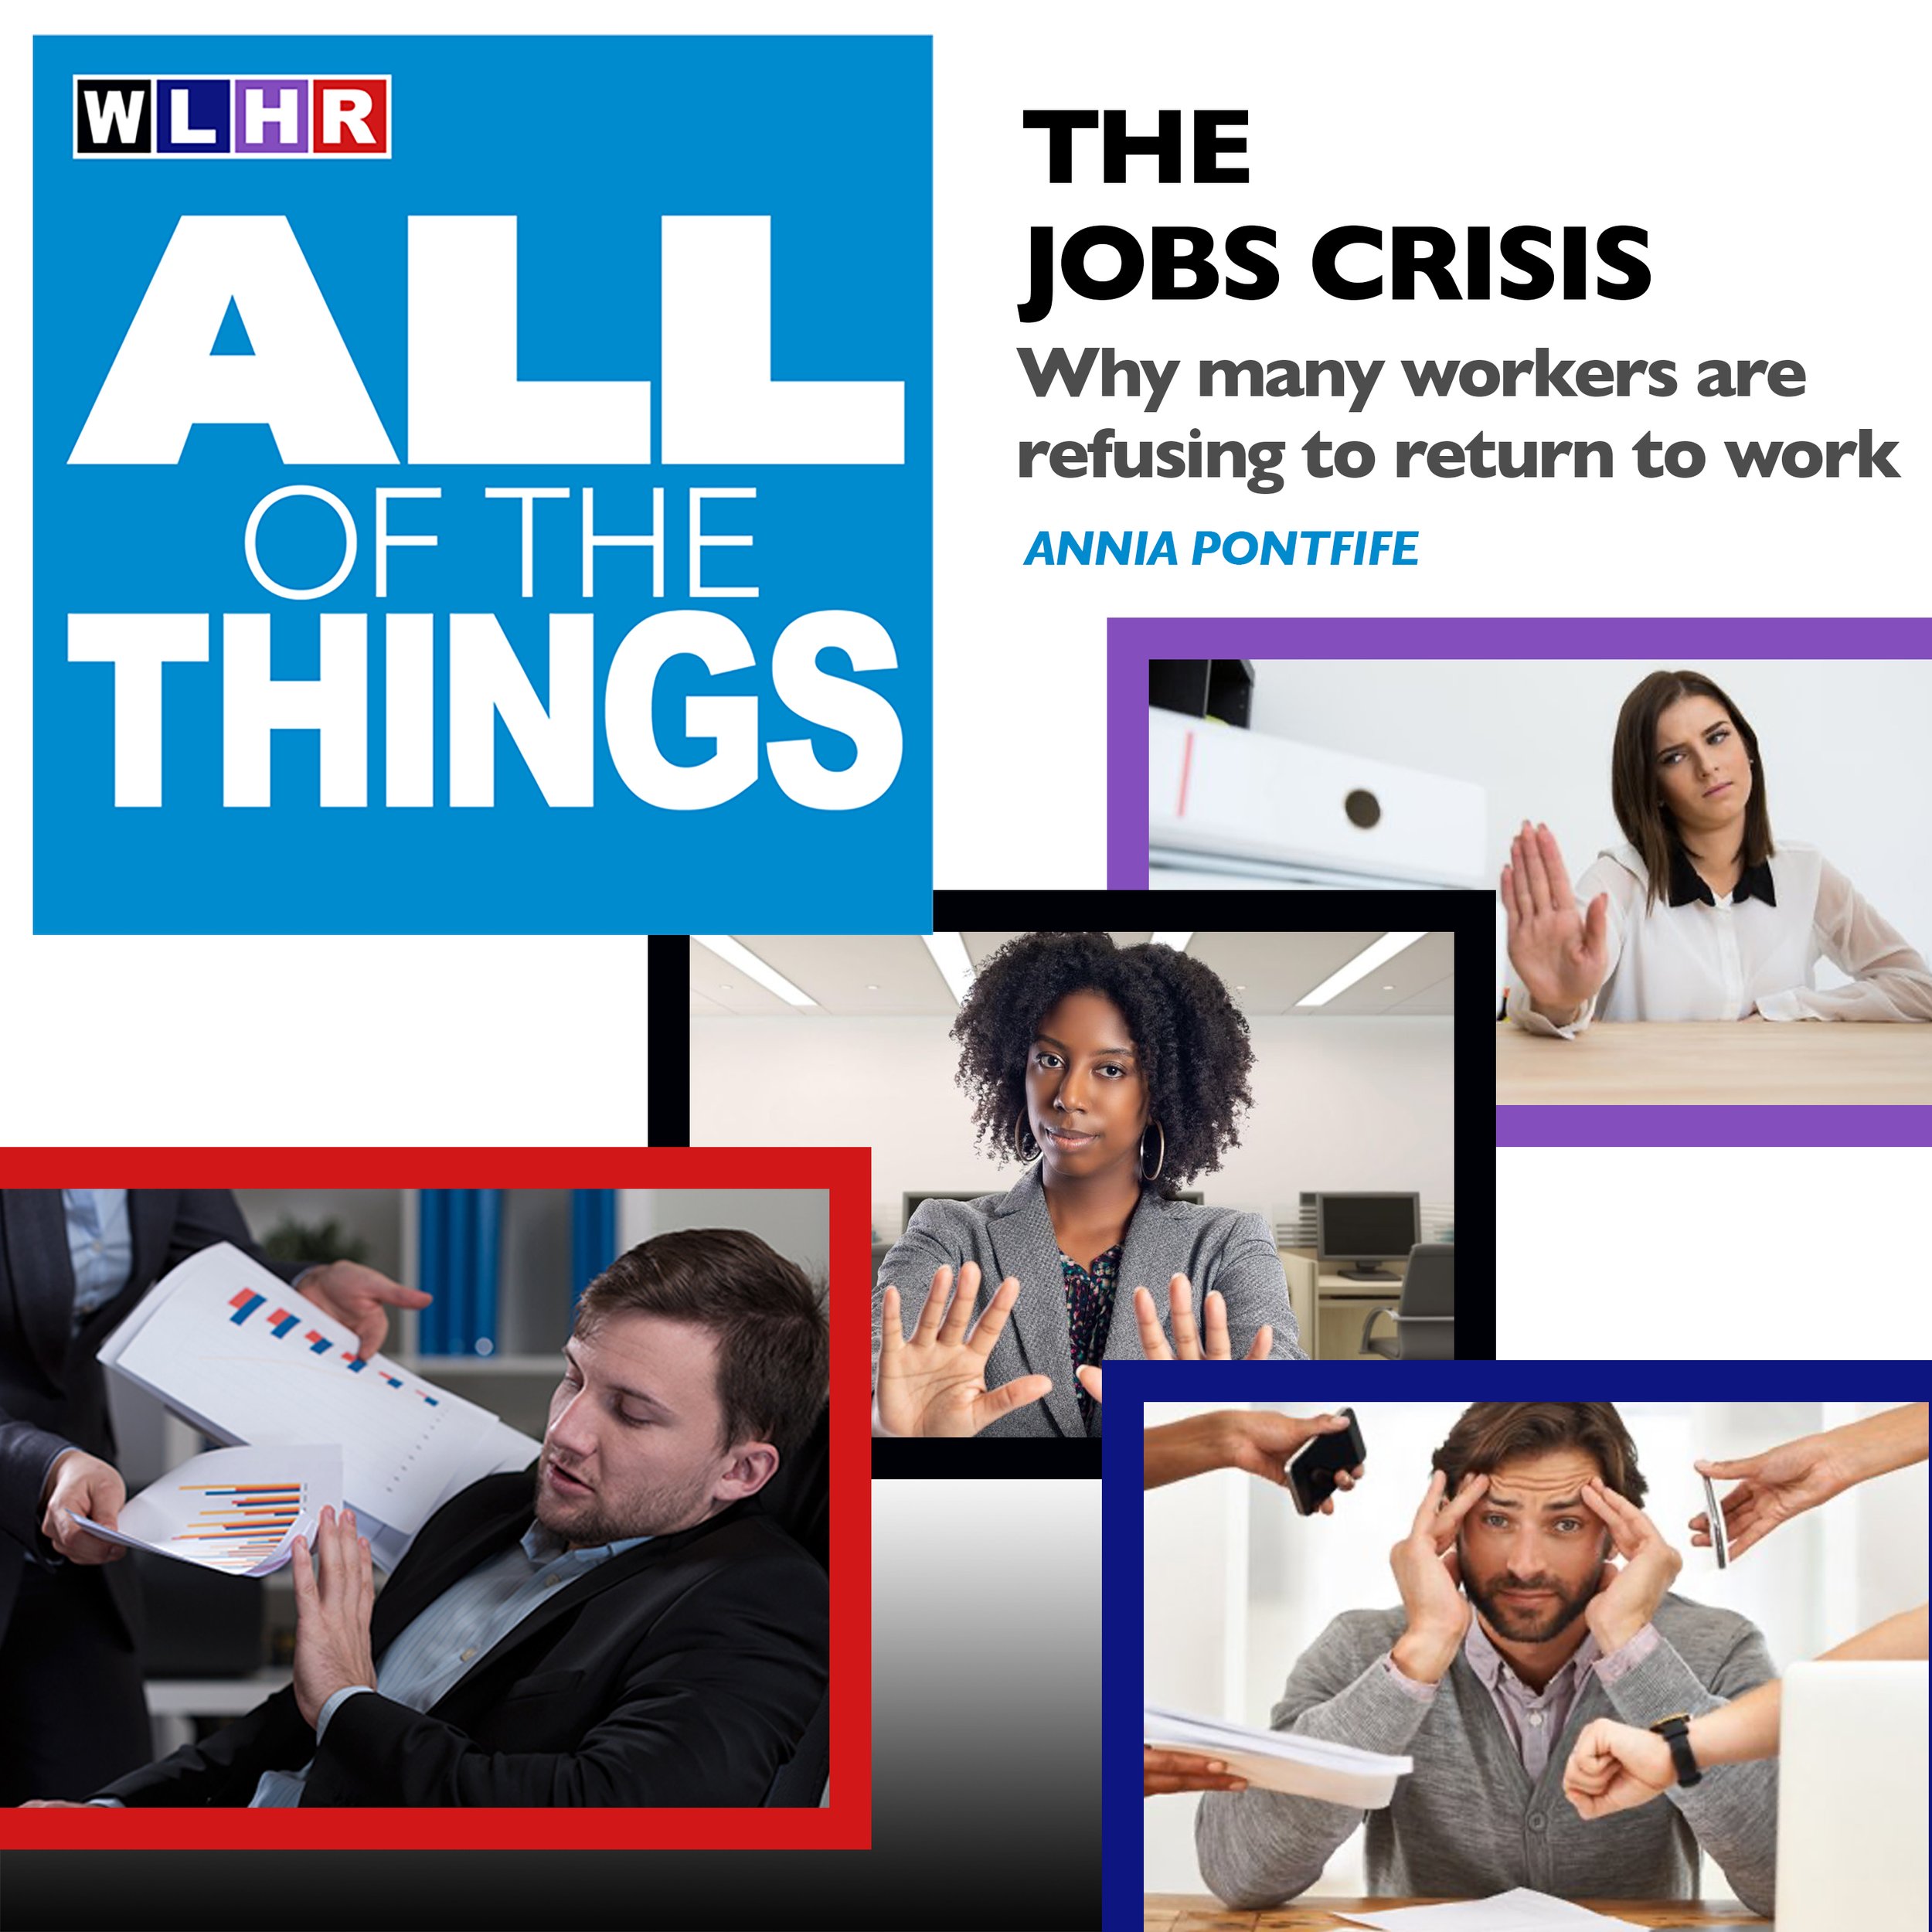 WLHR-All of the Things-jobs Crisis copy.jpg